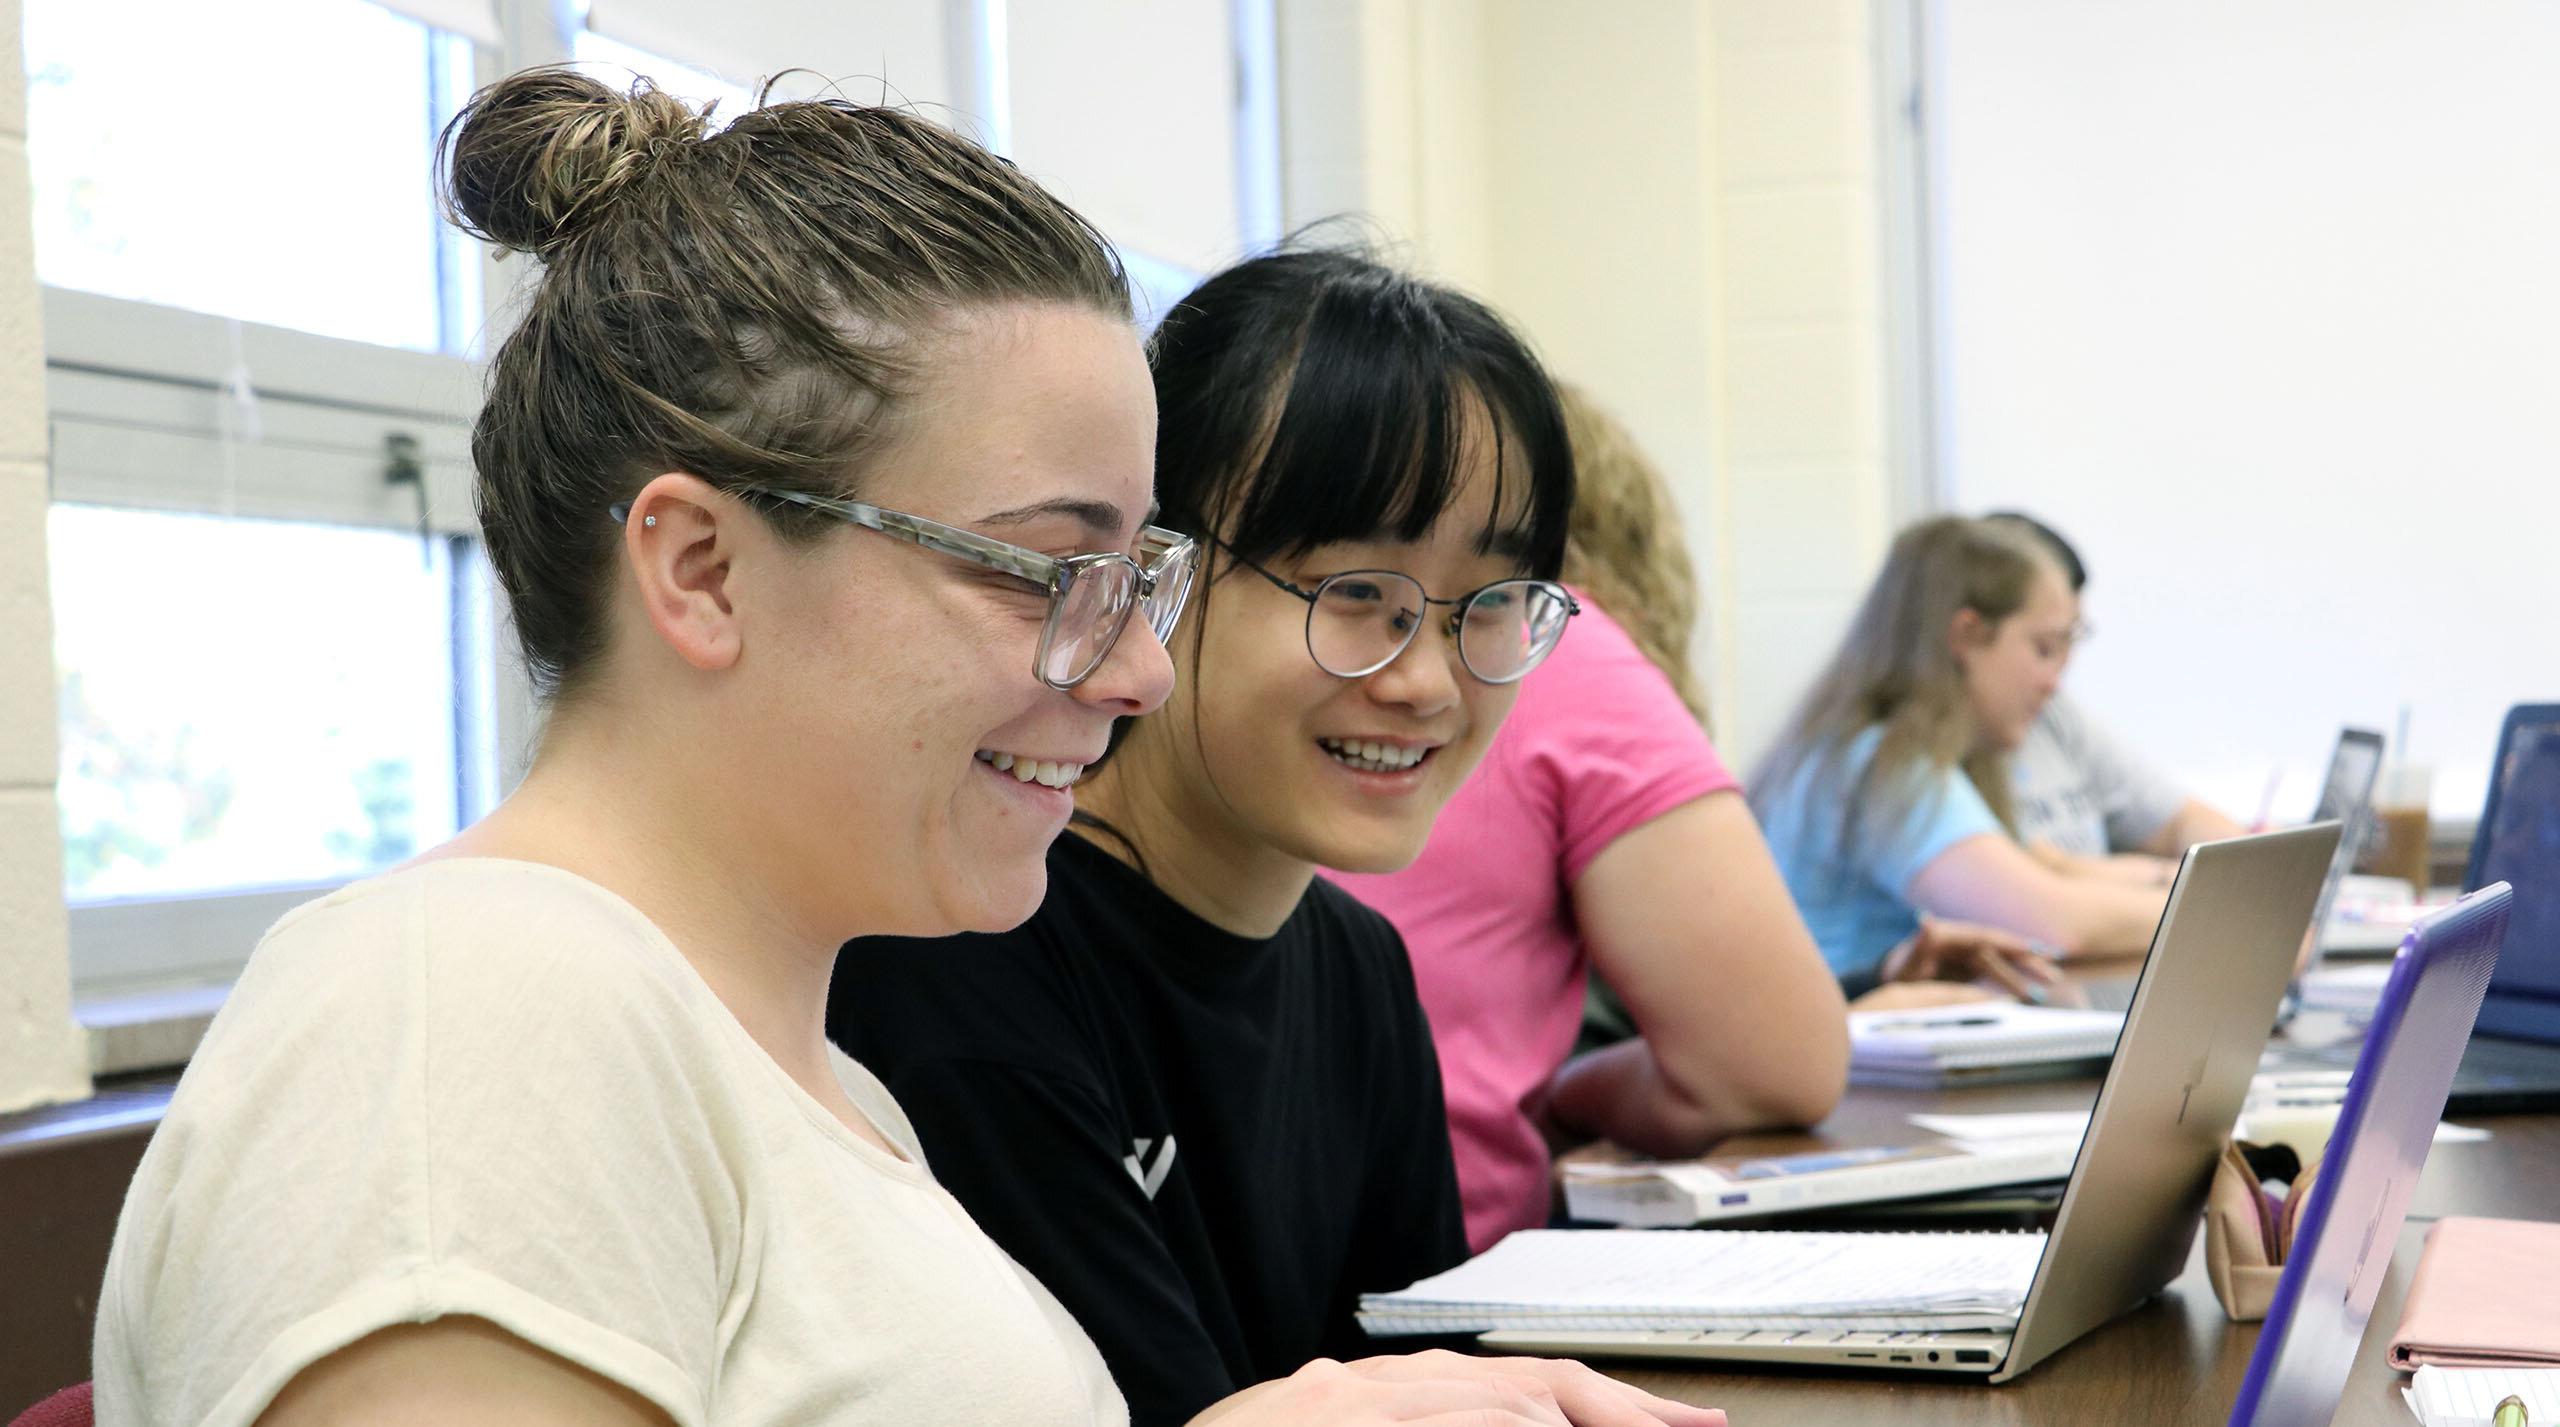 Students smiling and working in class